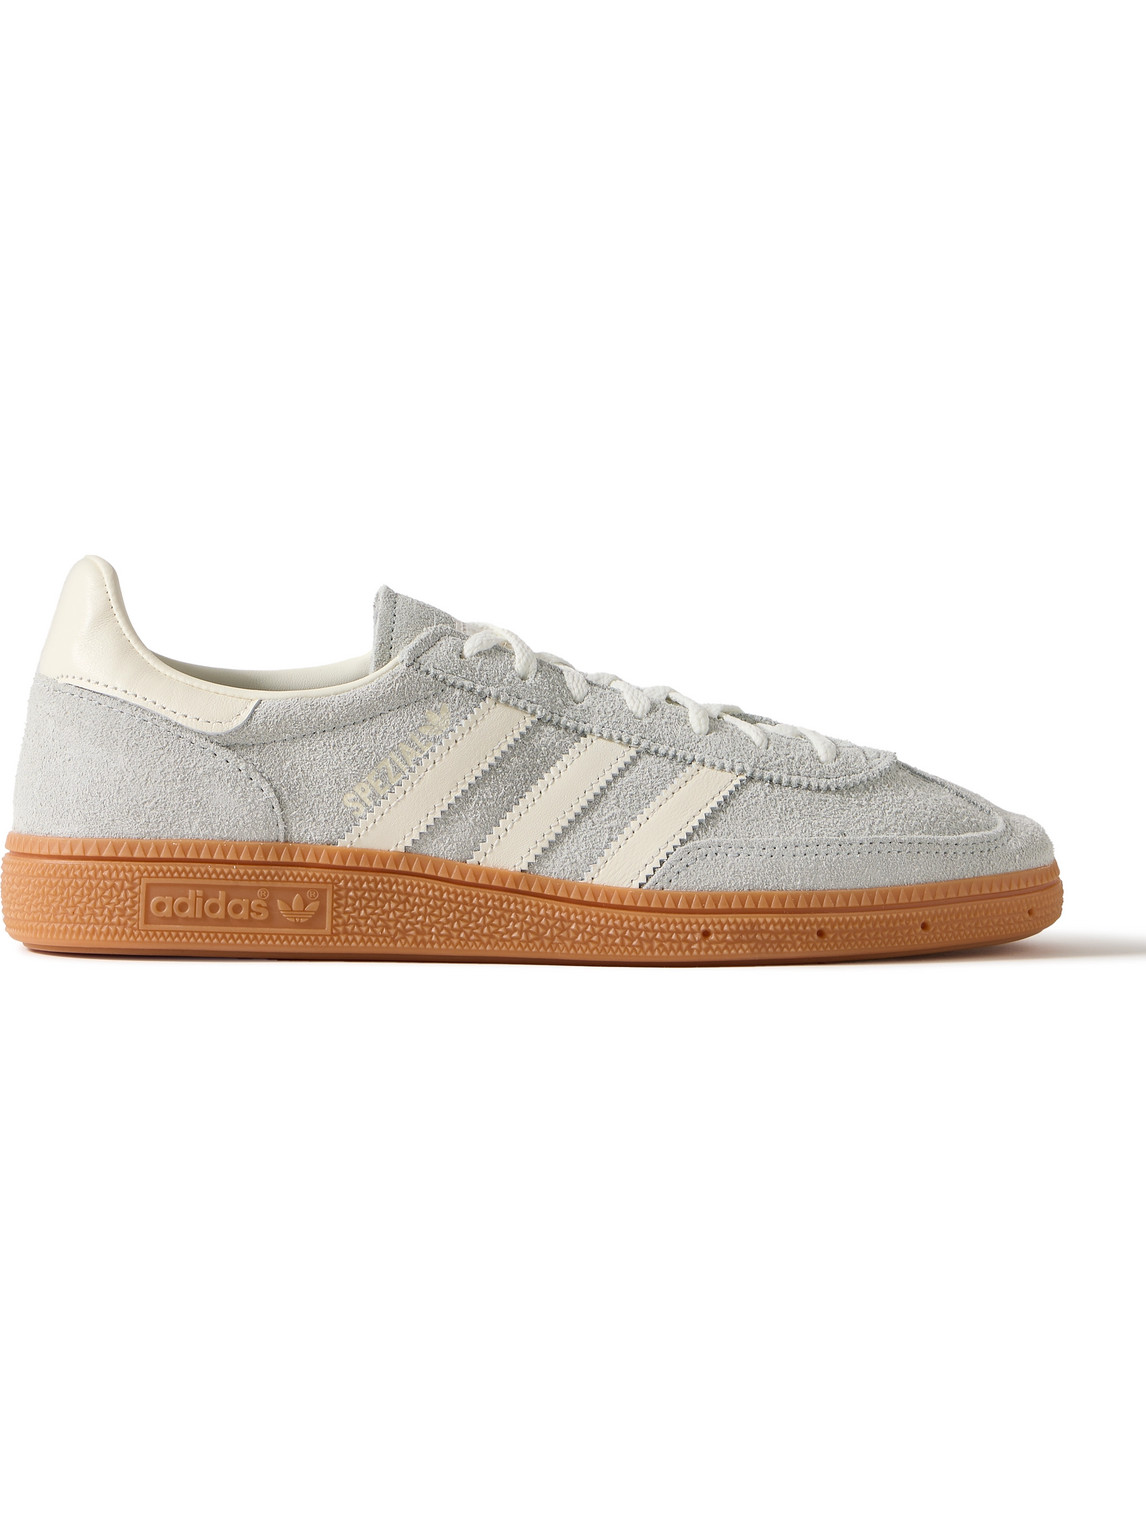 Adidas Originals Handball Spezial Leather-trimmed Suede Sneakers In Gray